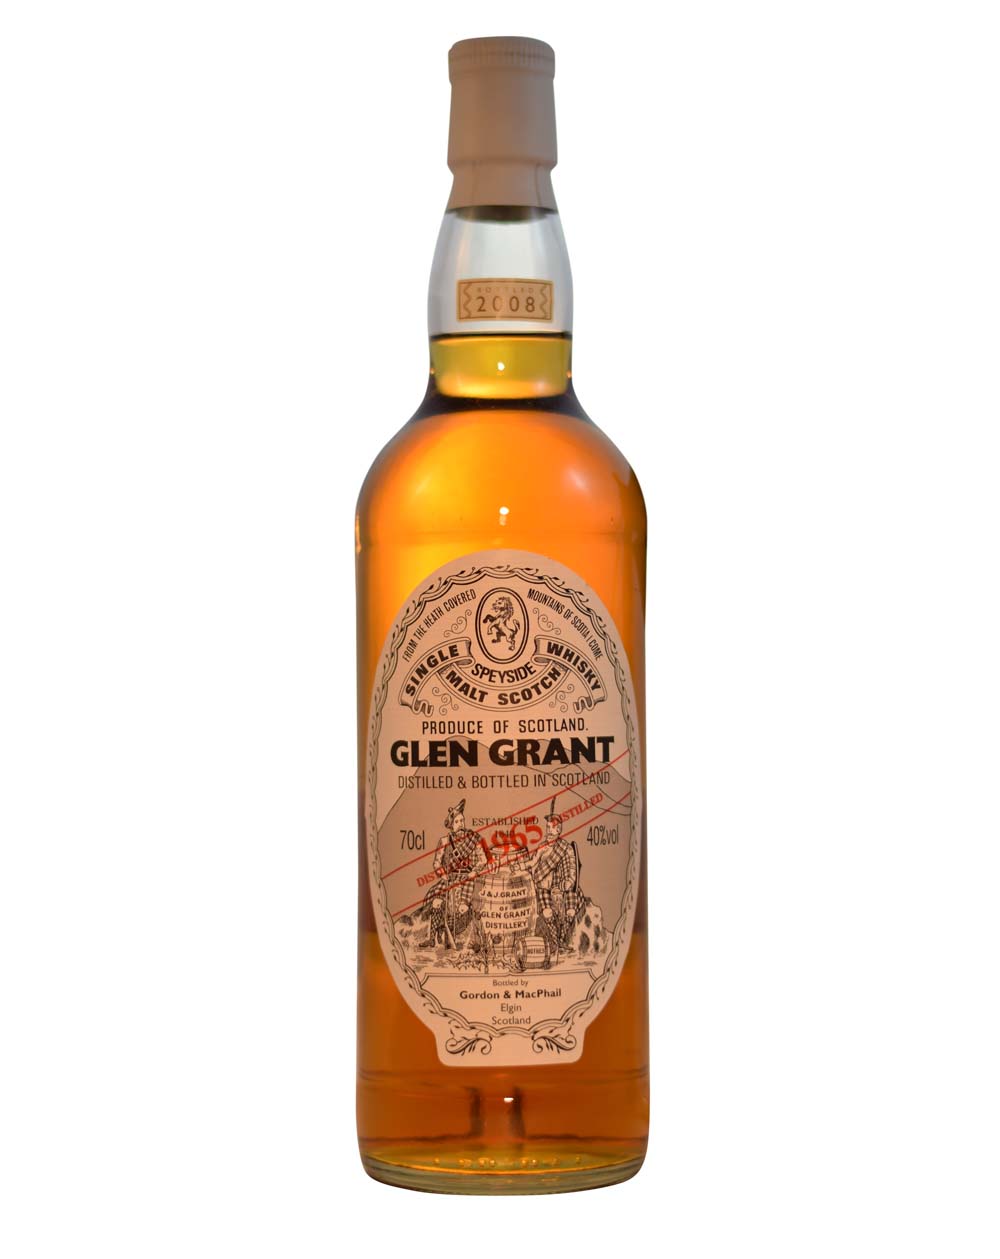 Glen Grant 1965 - 2008 Gordon and Macphail Musthave Malts MHM